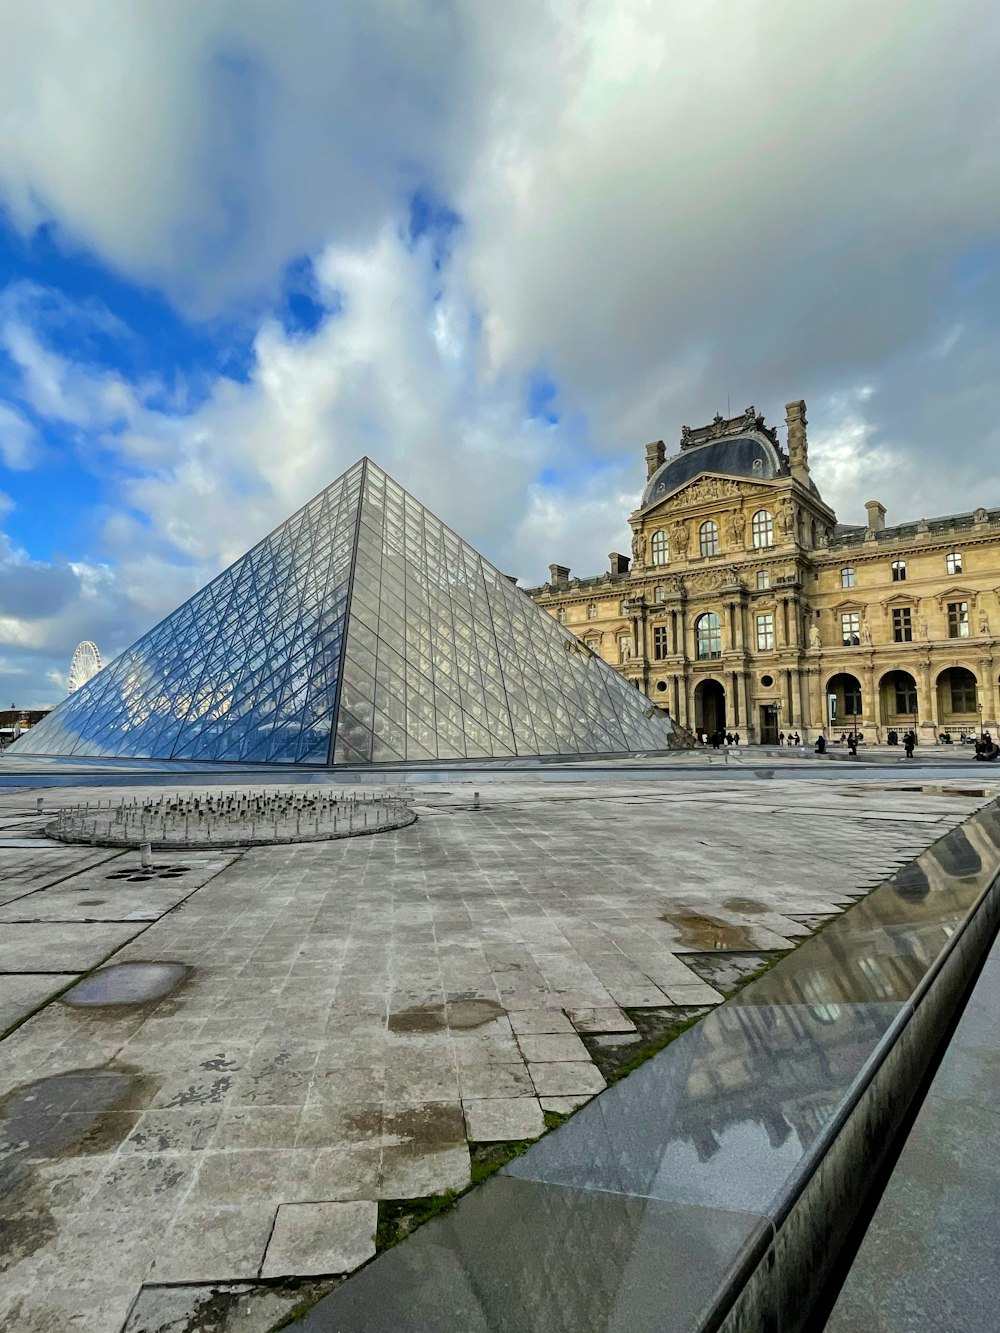 a large glass pyramid sitting in front of a building